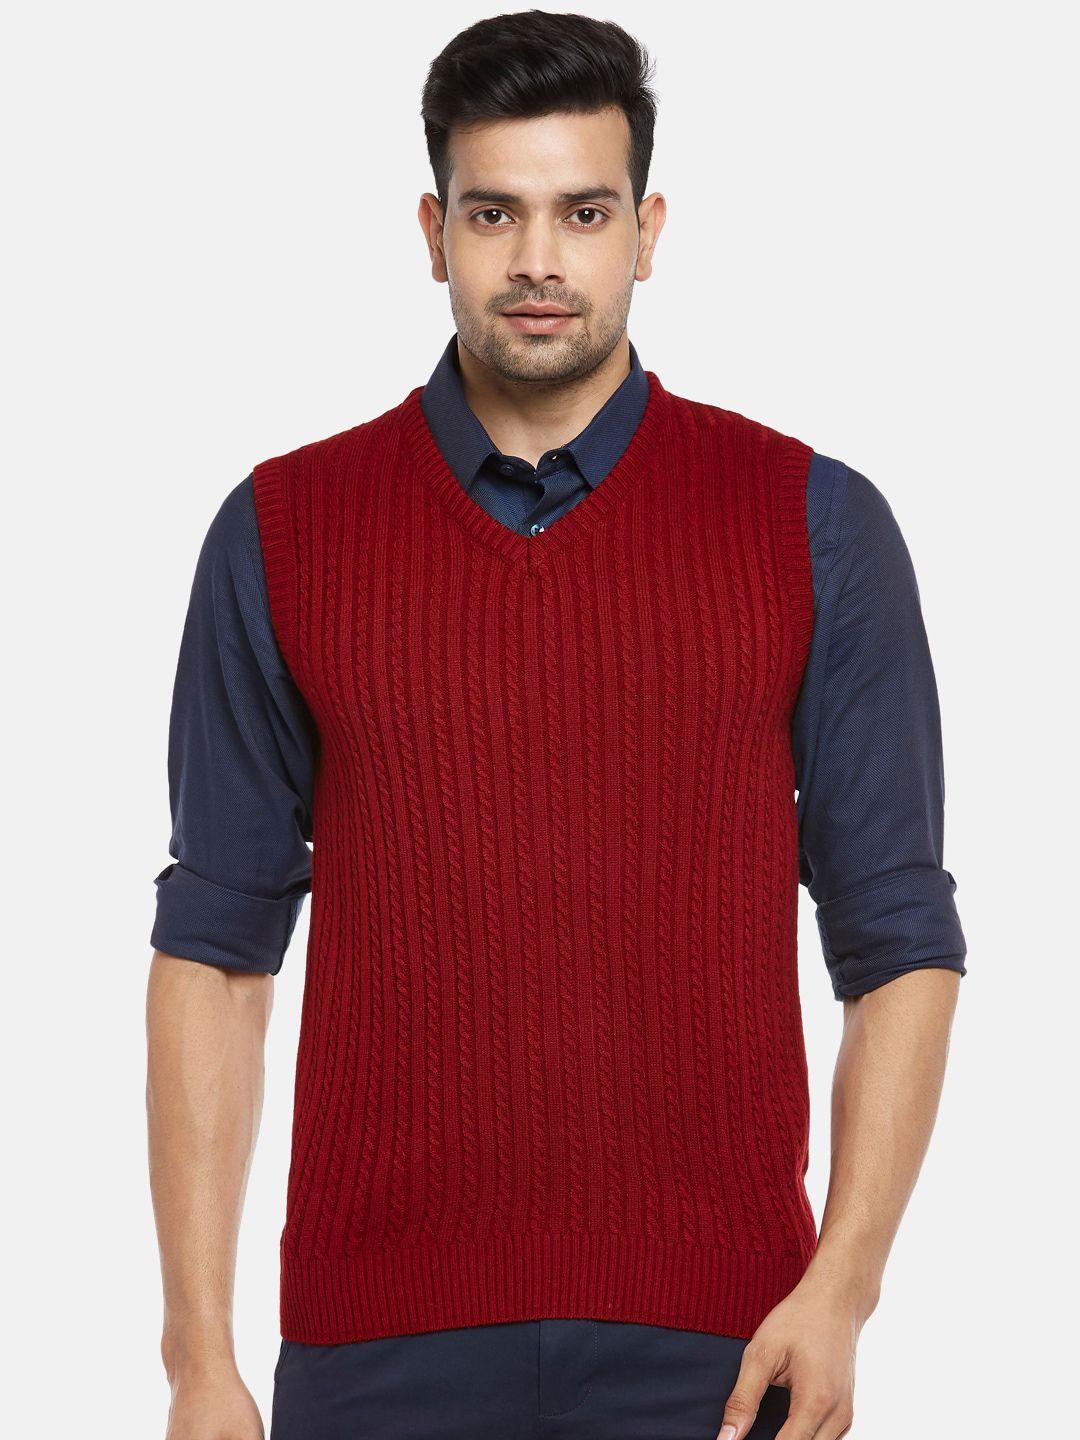 byford by pantaloons men maroon cable knit acrylic sweater vest